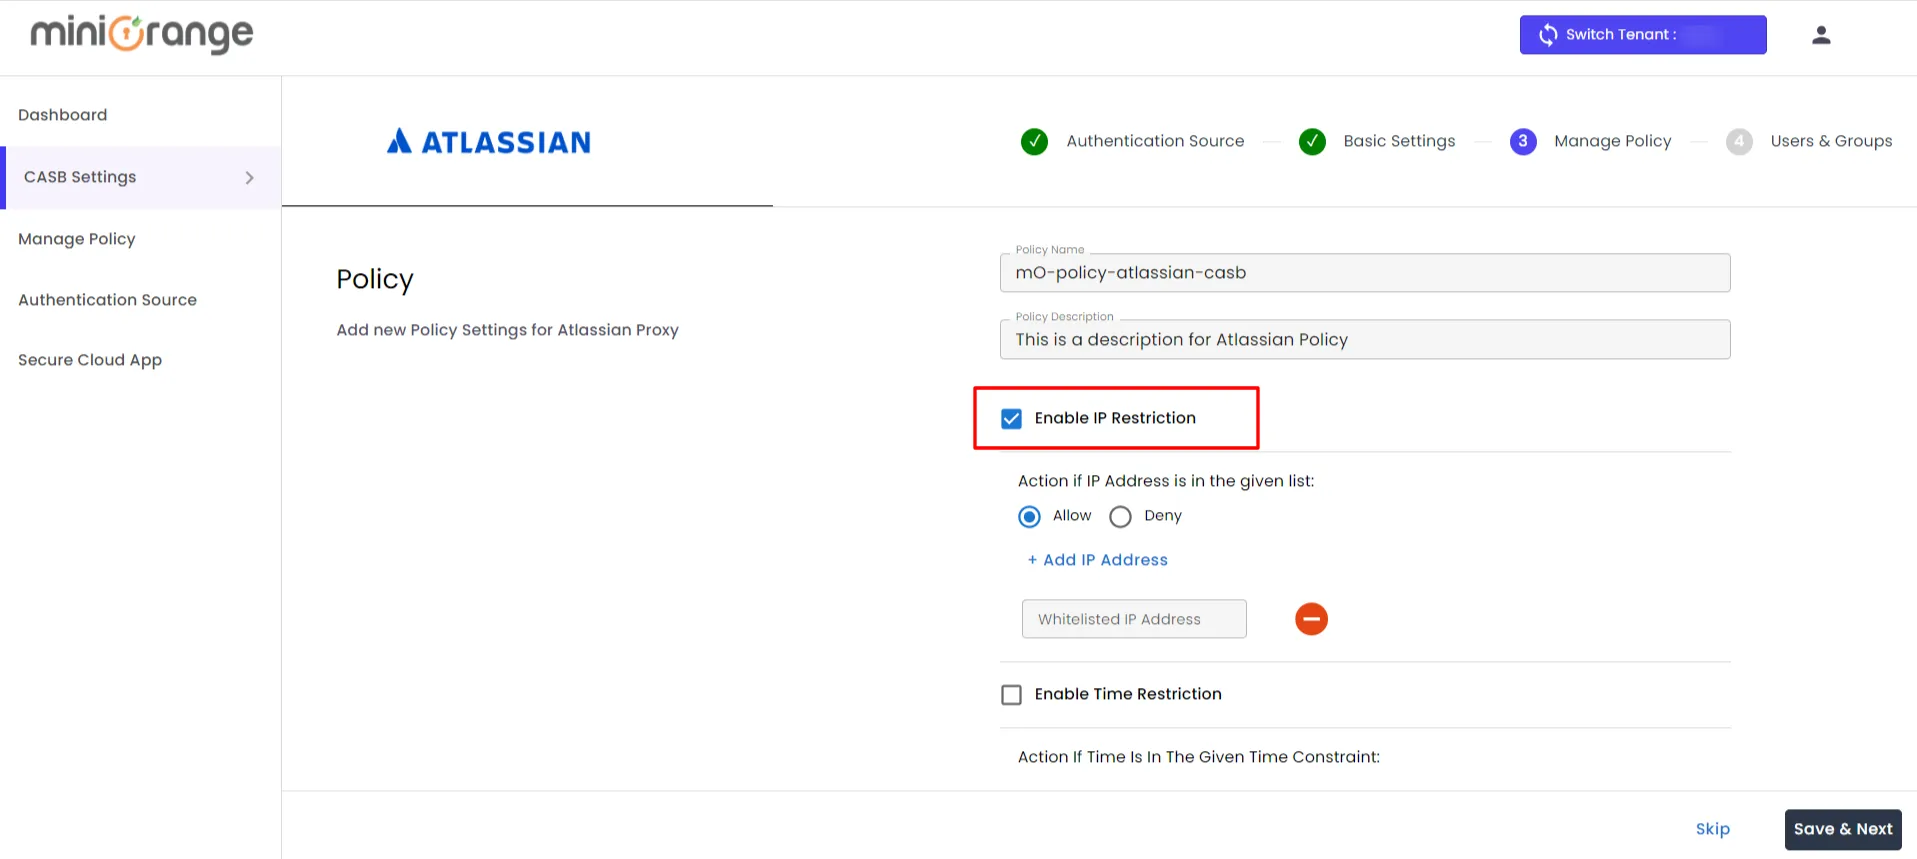 Atlassian CASB policies enable IP Restriction